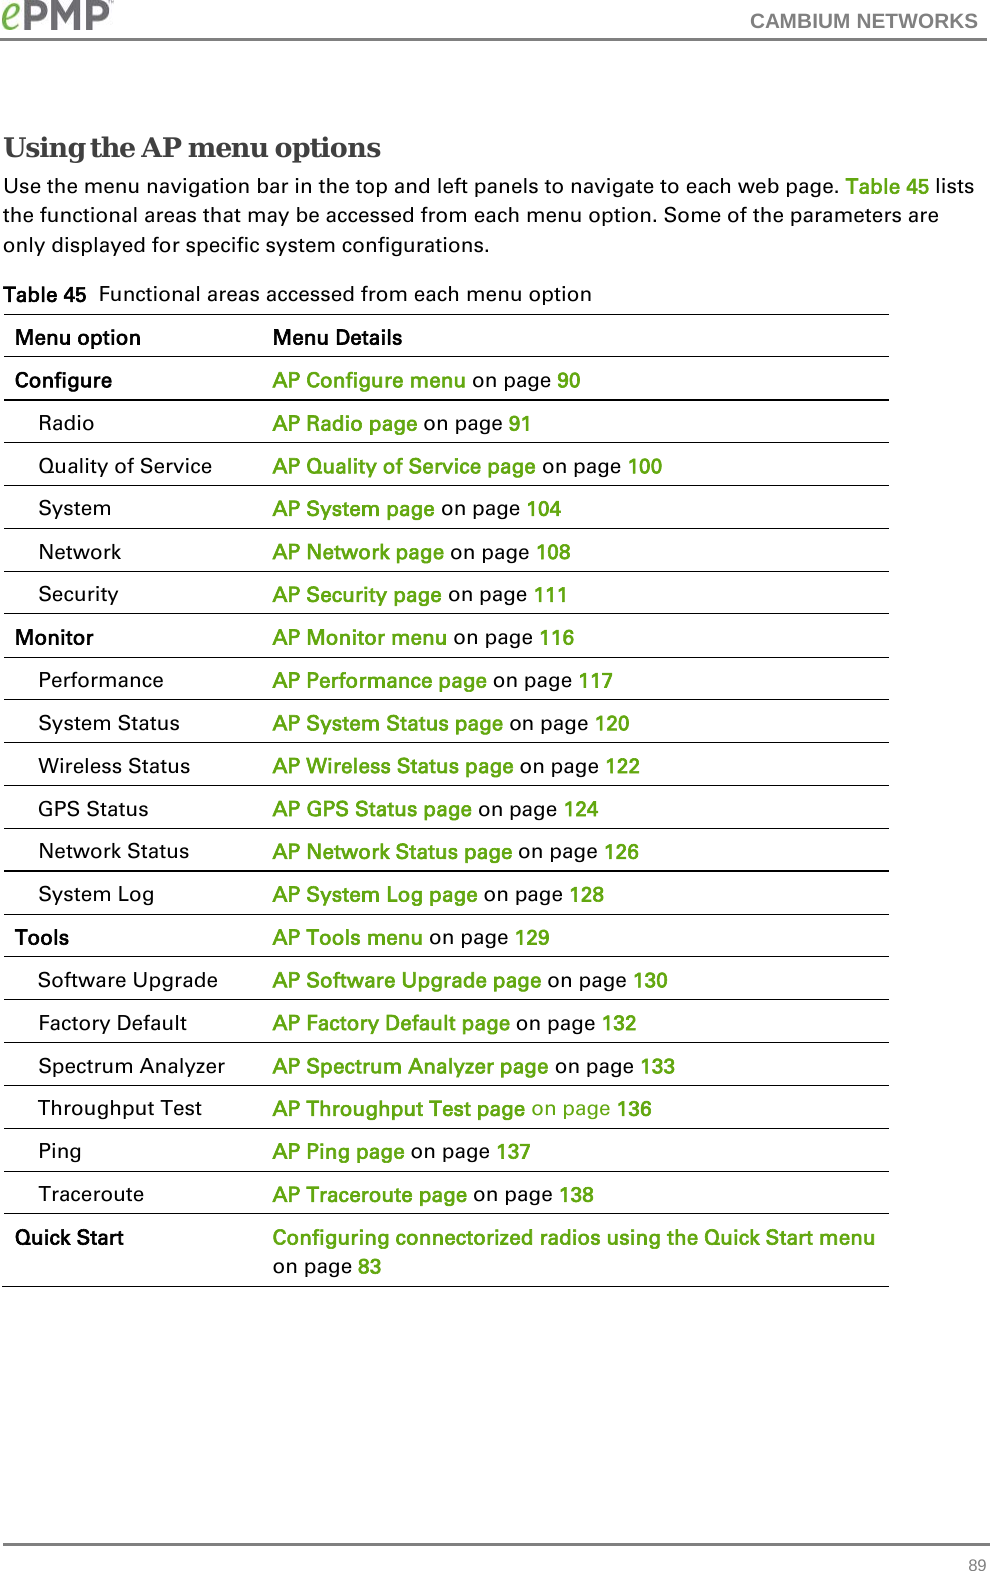 CAMBIUM NETWORKS  Using the AP menu options Use the menu navigation bar in the top and left panels to navigate to each web page. Table 45 lists the functional areas that may be accessed from each menu option. Some of the parameters are only displayed for specific system configurations. Table 45  Functional areas accessed from each menu option Menu option Menu Details Configure AP Configure menu on page 90     Radio AP Radio page on page 91     Quality of Service AP Quality of Service page on page 100     System AP System page on page 104     Network AP Network page on page 108     Security AP Security page on page 111 Monitor AP Monitor menu on page 116     Performance AP Performance page on page 117     System Status AP System Status page on page 120     Wireless Status AP Wireless Status page on page 122      GPS Status AP GPS Status page on page 124     Network Status AP Network Status page on page 126     System Log AP System Log page on page 128 Tools AP Tools menu on page 129     Software Upgrade AP Software Upgrade page on page 130     Factory Default AP Factory Default page on page 132     Spectrum Analyzer AP Spectrum Analyzer page on page 133     Throughput Test AP Throughput Test page on page 136     Ping AP Ping page on page 137     Traceroute AP Traceroute page on page 138 Quick Start Configuring connectorized radios using the Quick Start menu on page 83      89 